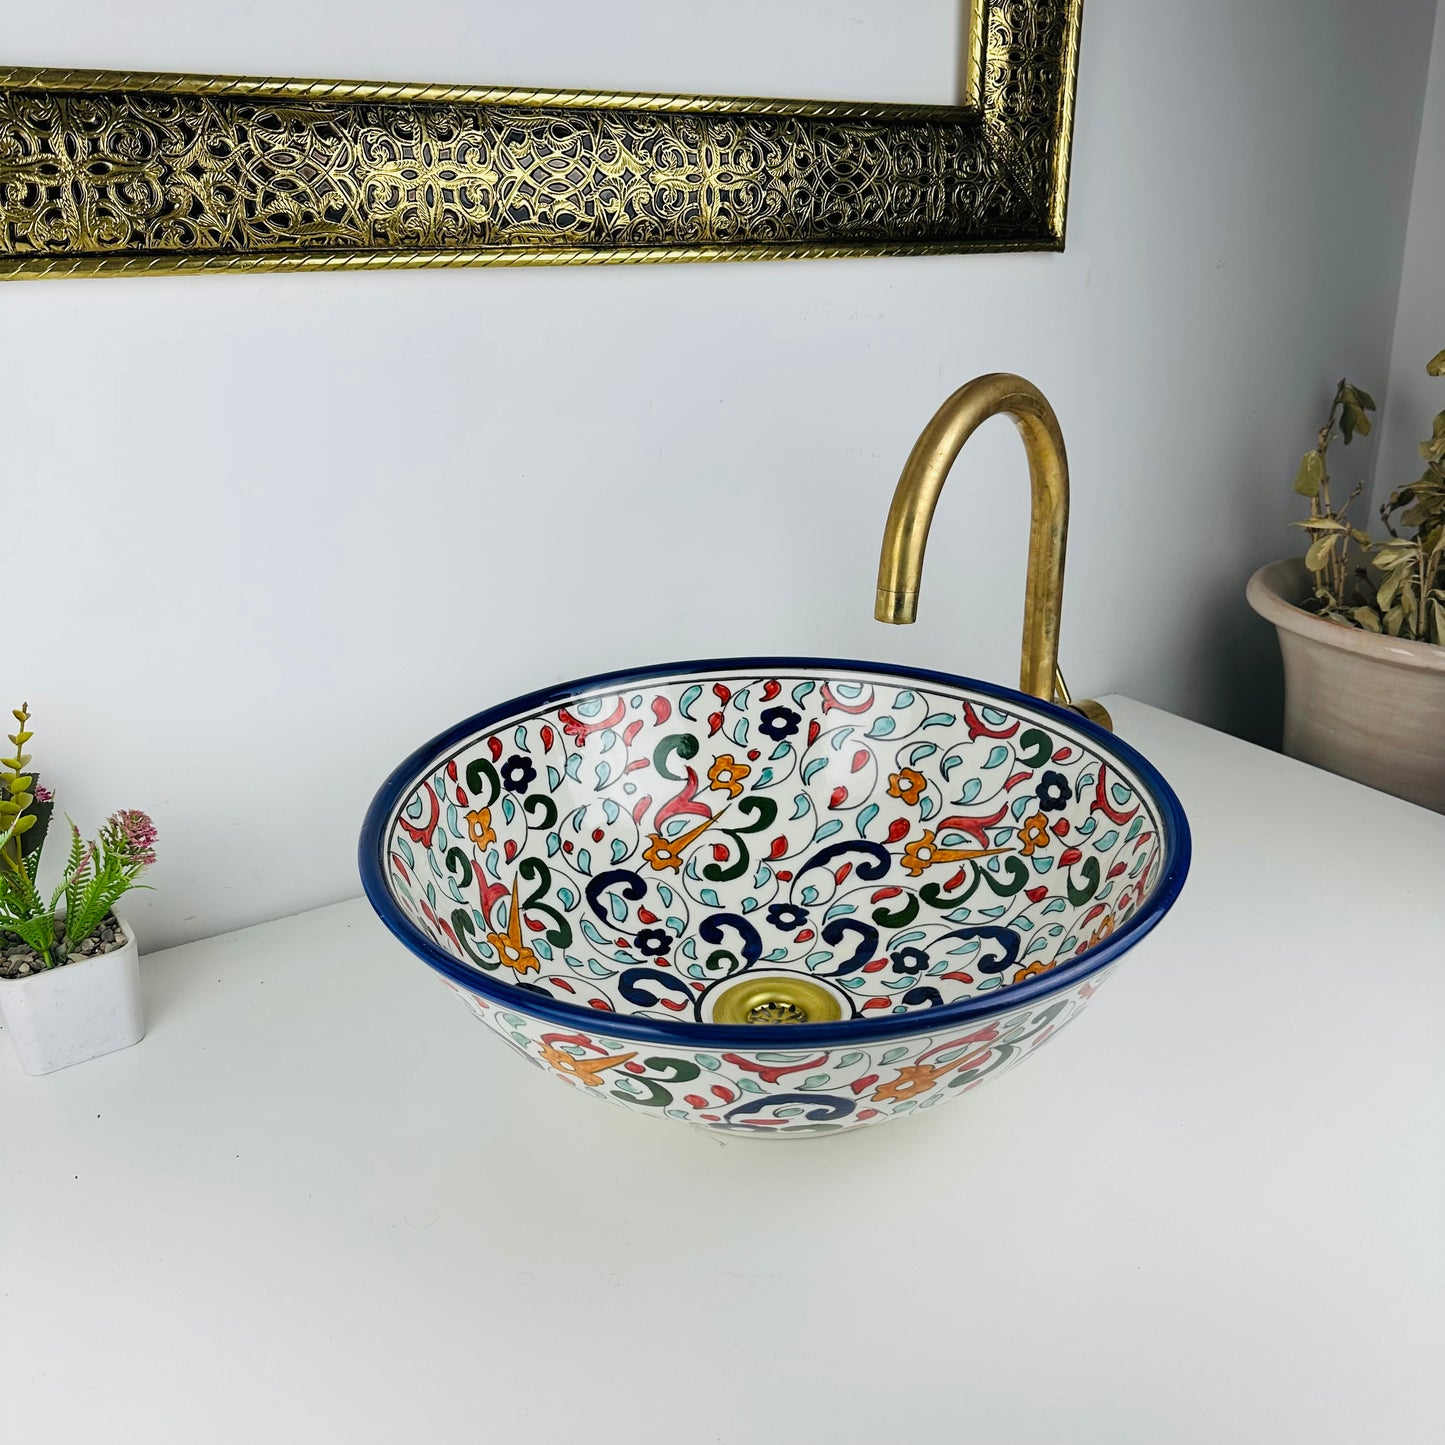 Colorful Artisanal Touch: Handcrafted Ceramic Sink with Unique Design